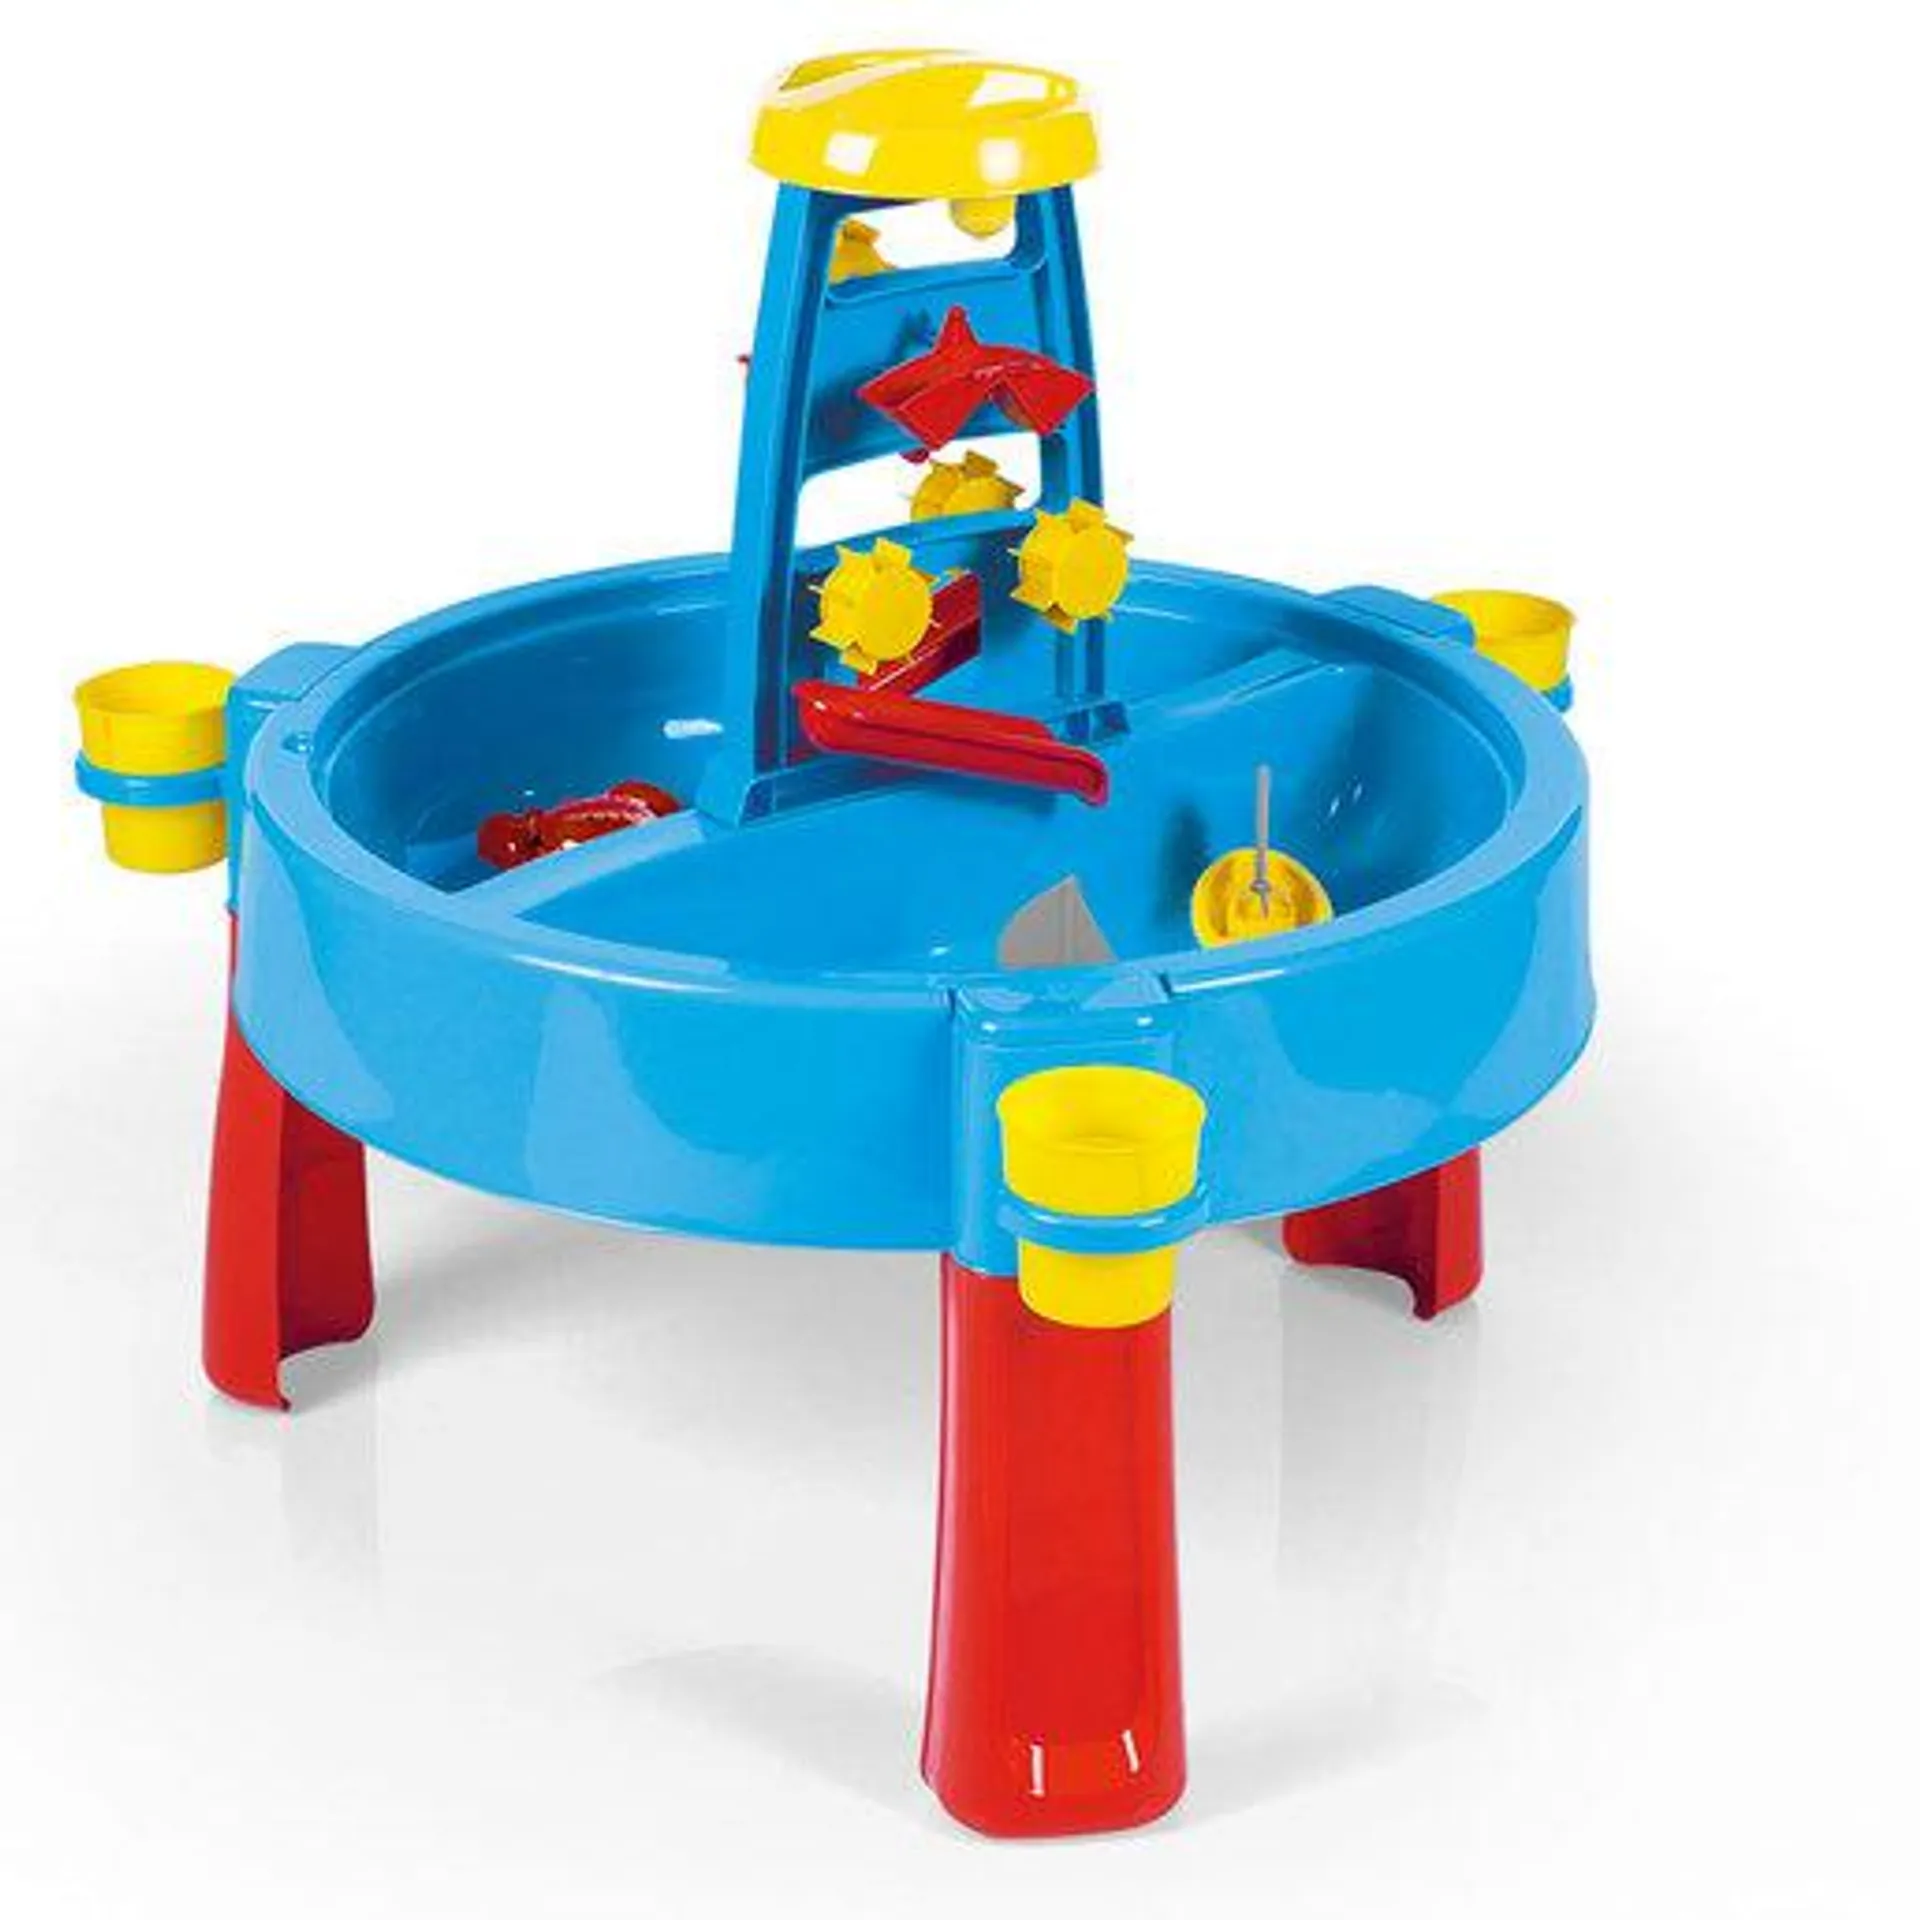 Dolu 3-in-1 Activity, Sand and Water Table With Lid